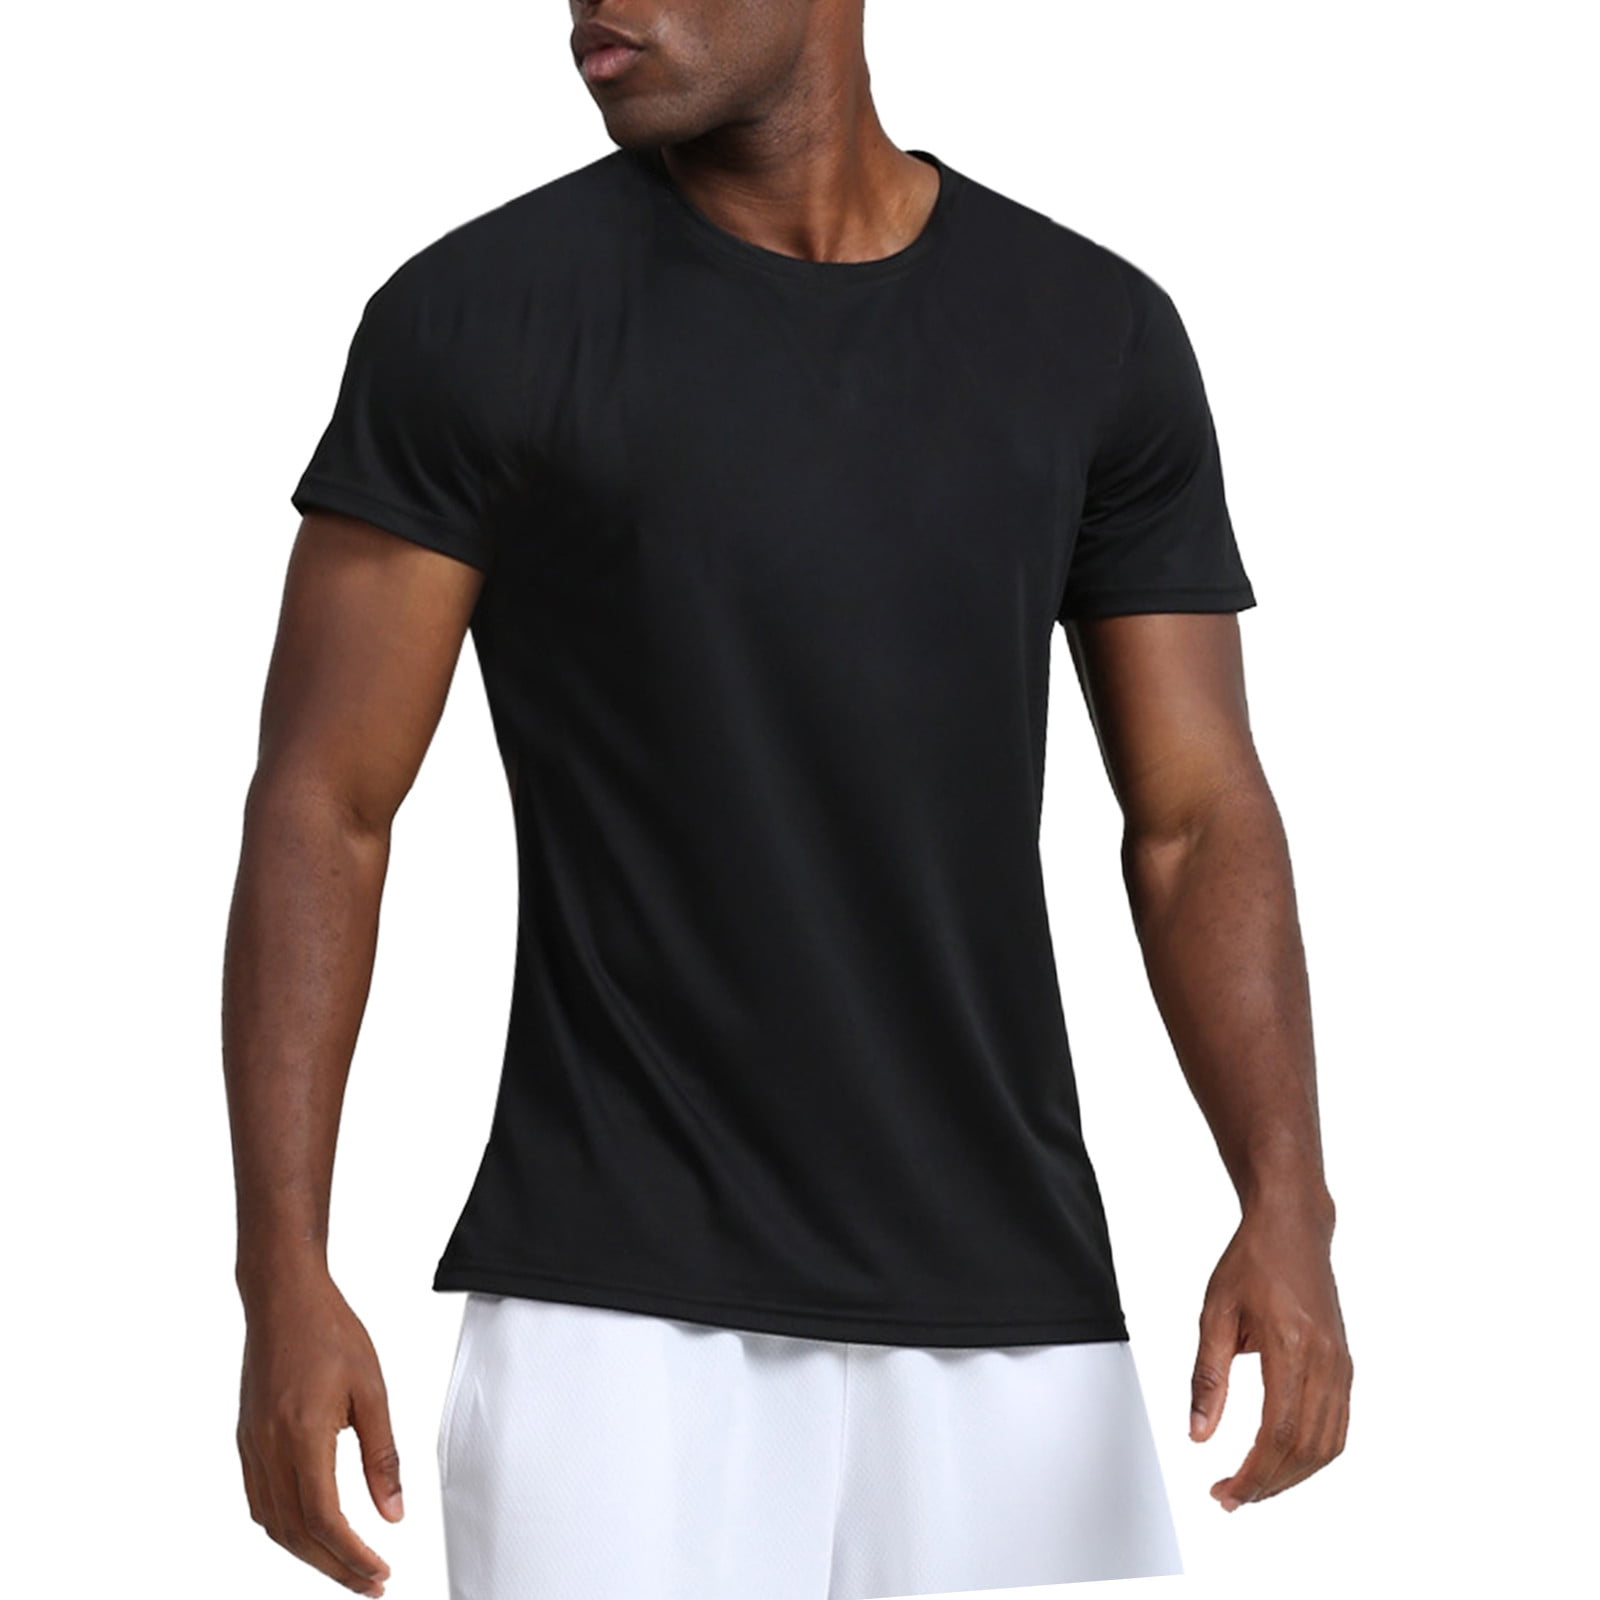 Deals of the Week ! BVnarty Shirts Clearance Men's Running Sports